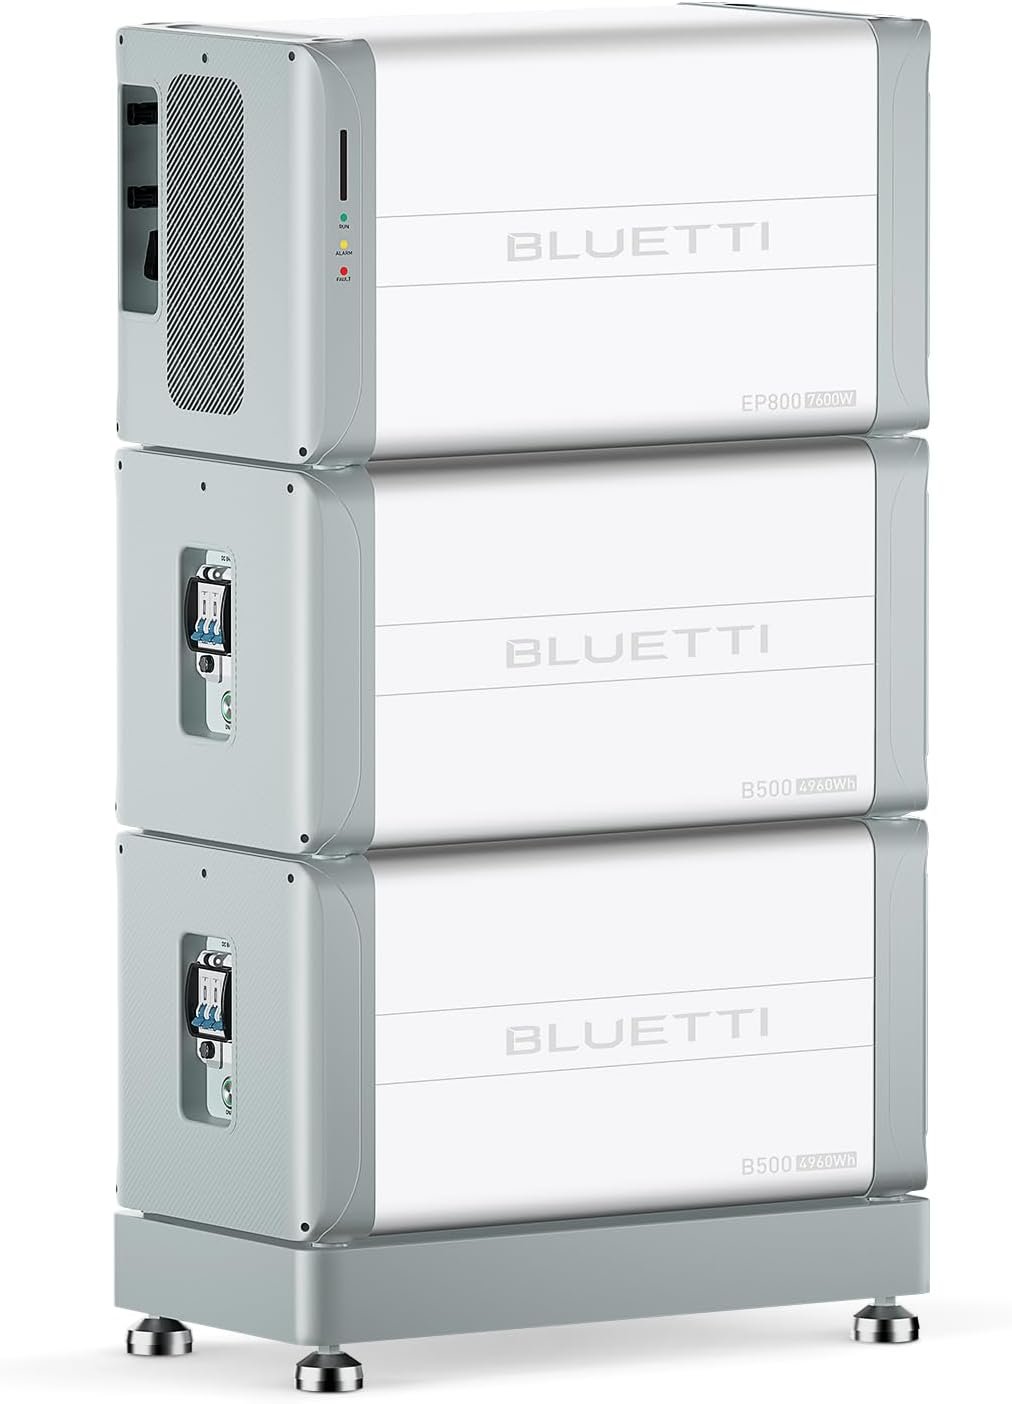 BLUETTI Home Energy Storage System EP800&2 B500 Review